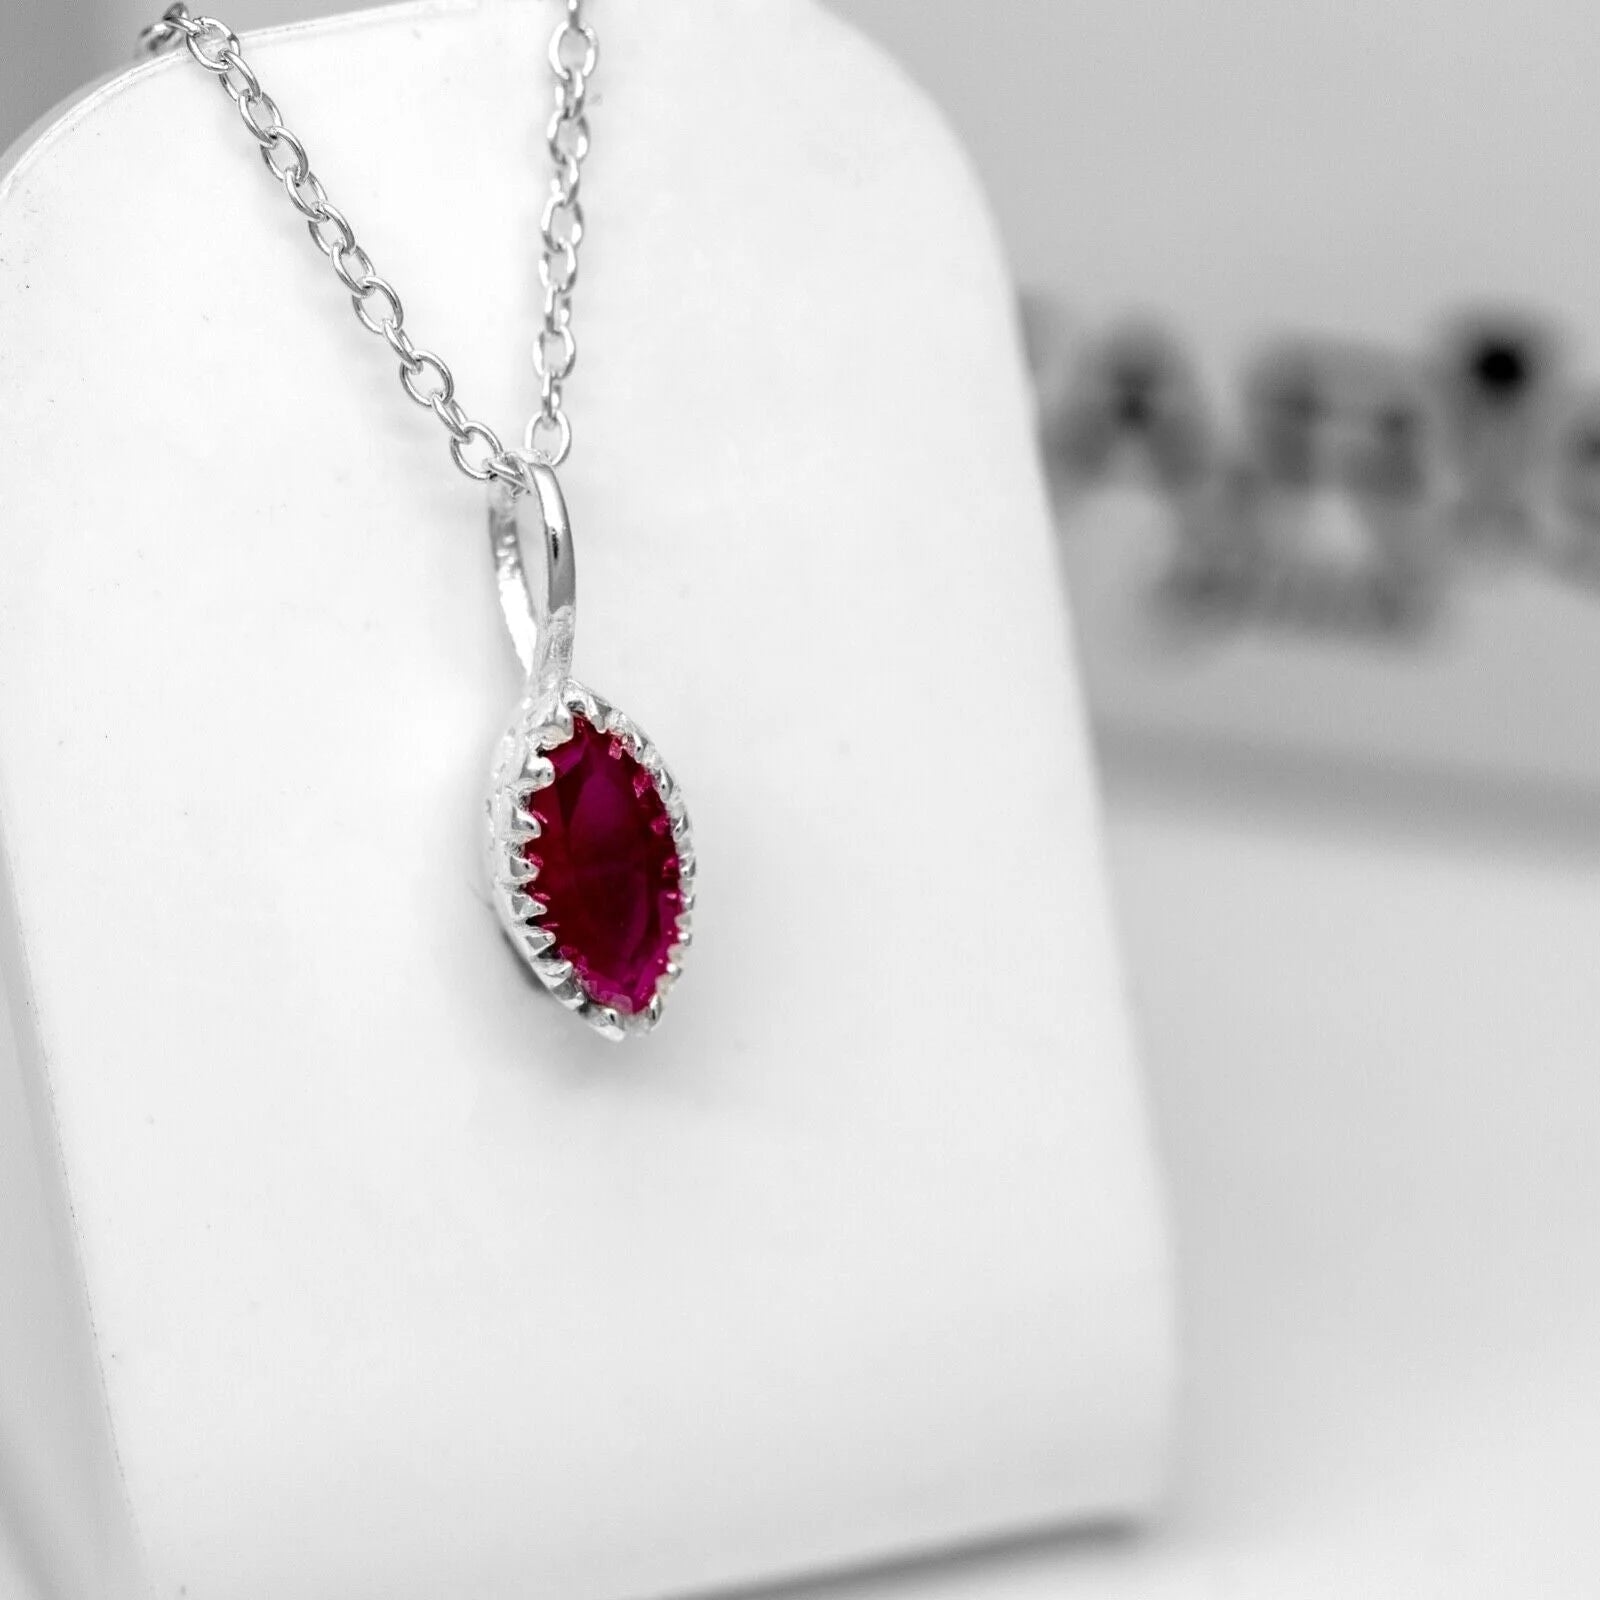 Marquise Red Ruby Sterling Silver 925 Pendant Necklace Ladies Jewellery Gift